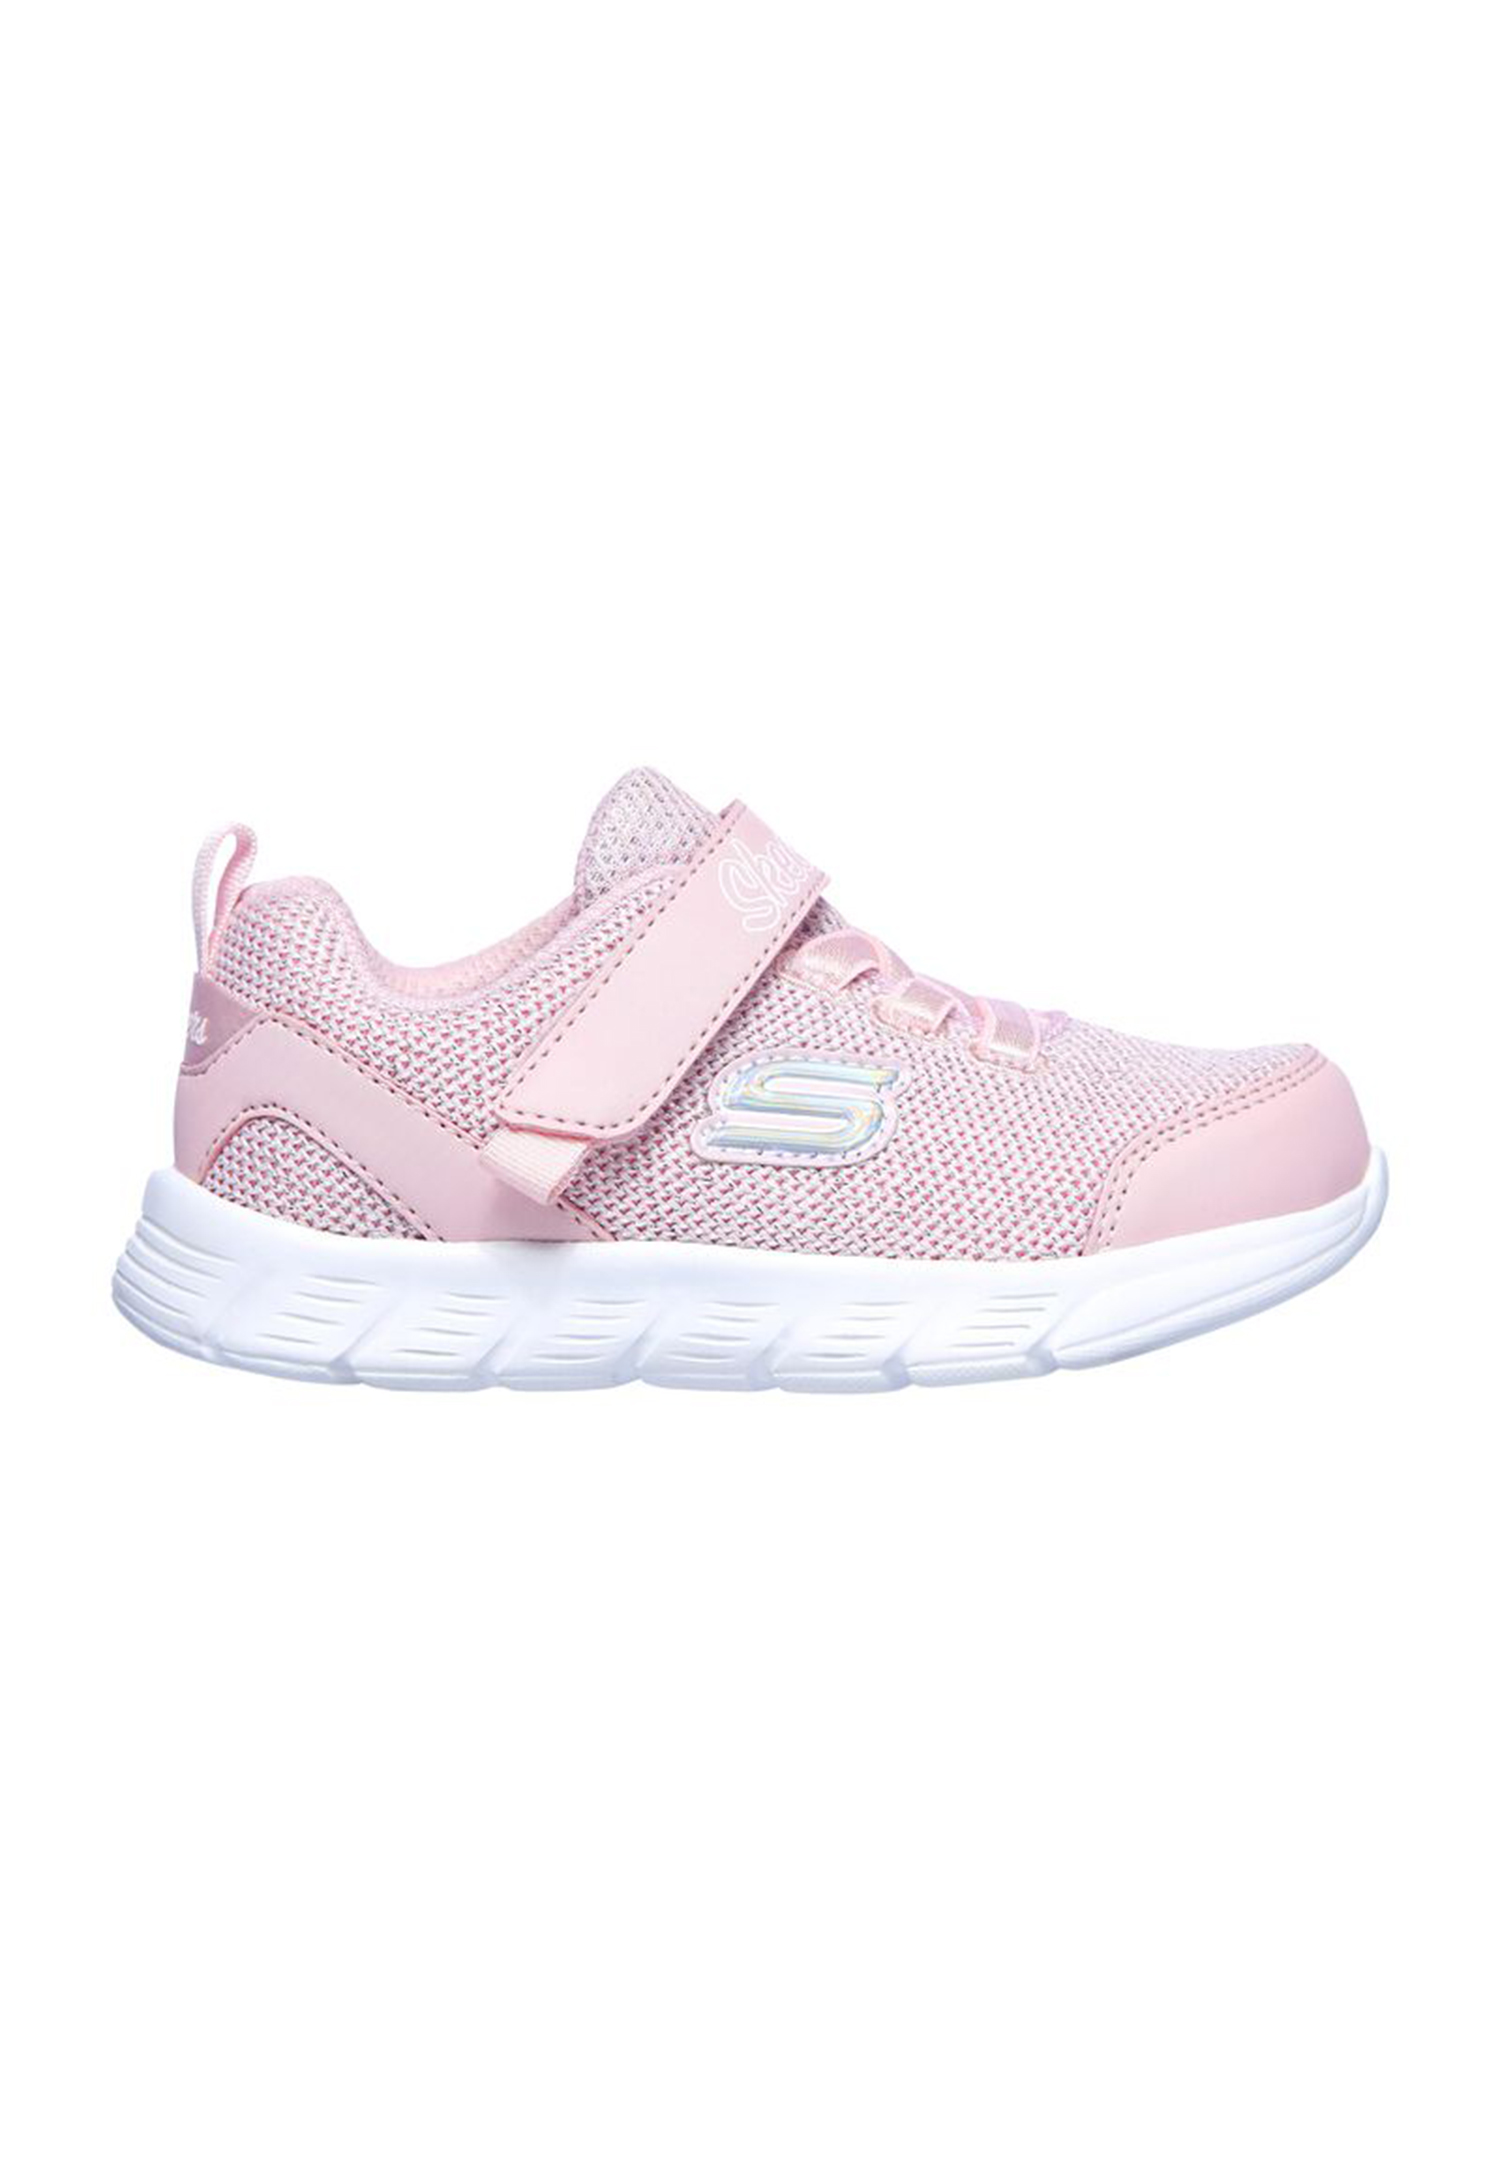 Skechers TODDLERS Comfy Flex MOVING ON Sneakers baby pink 302107N LTPK